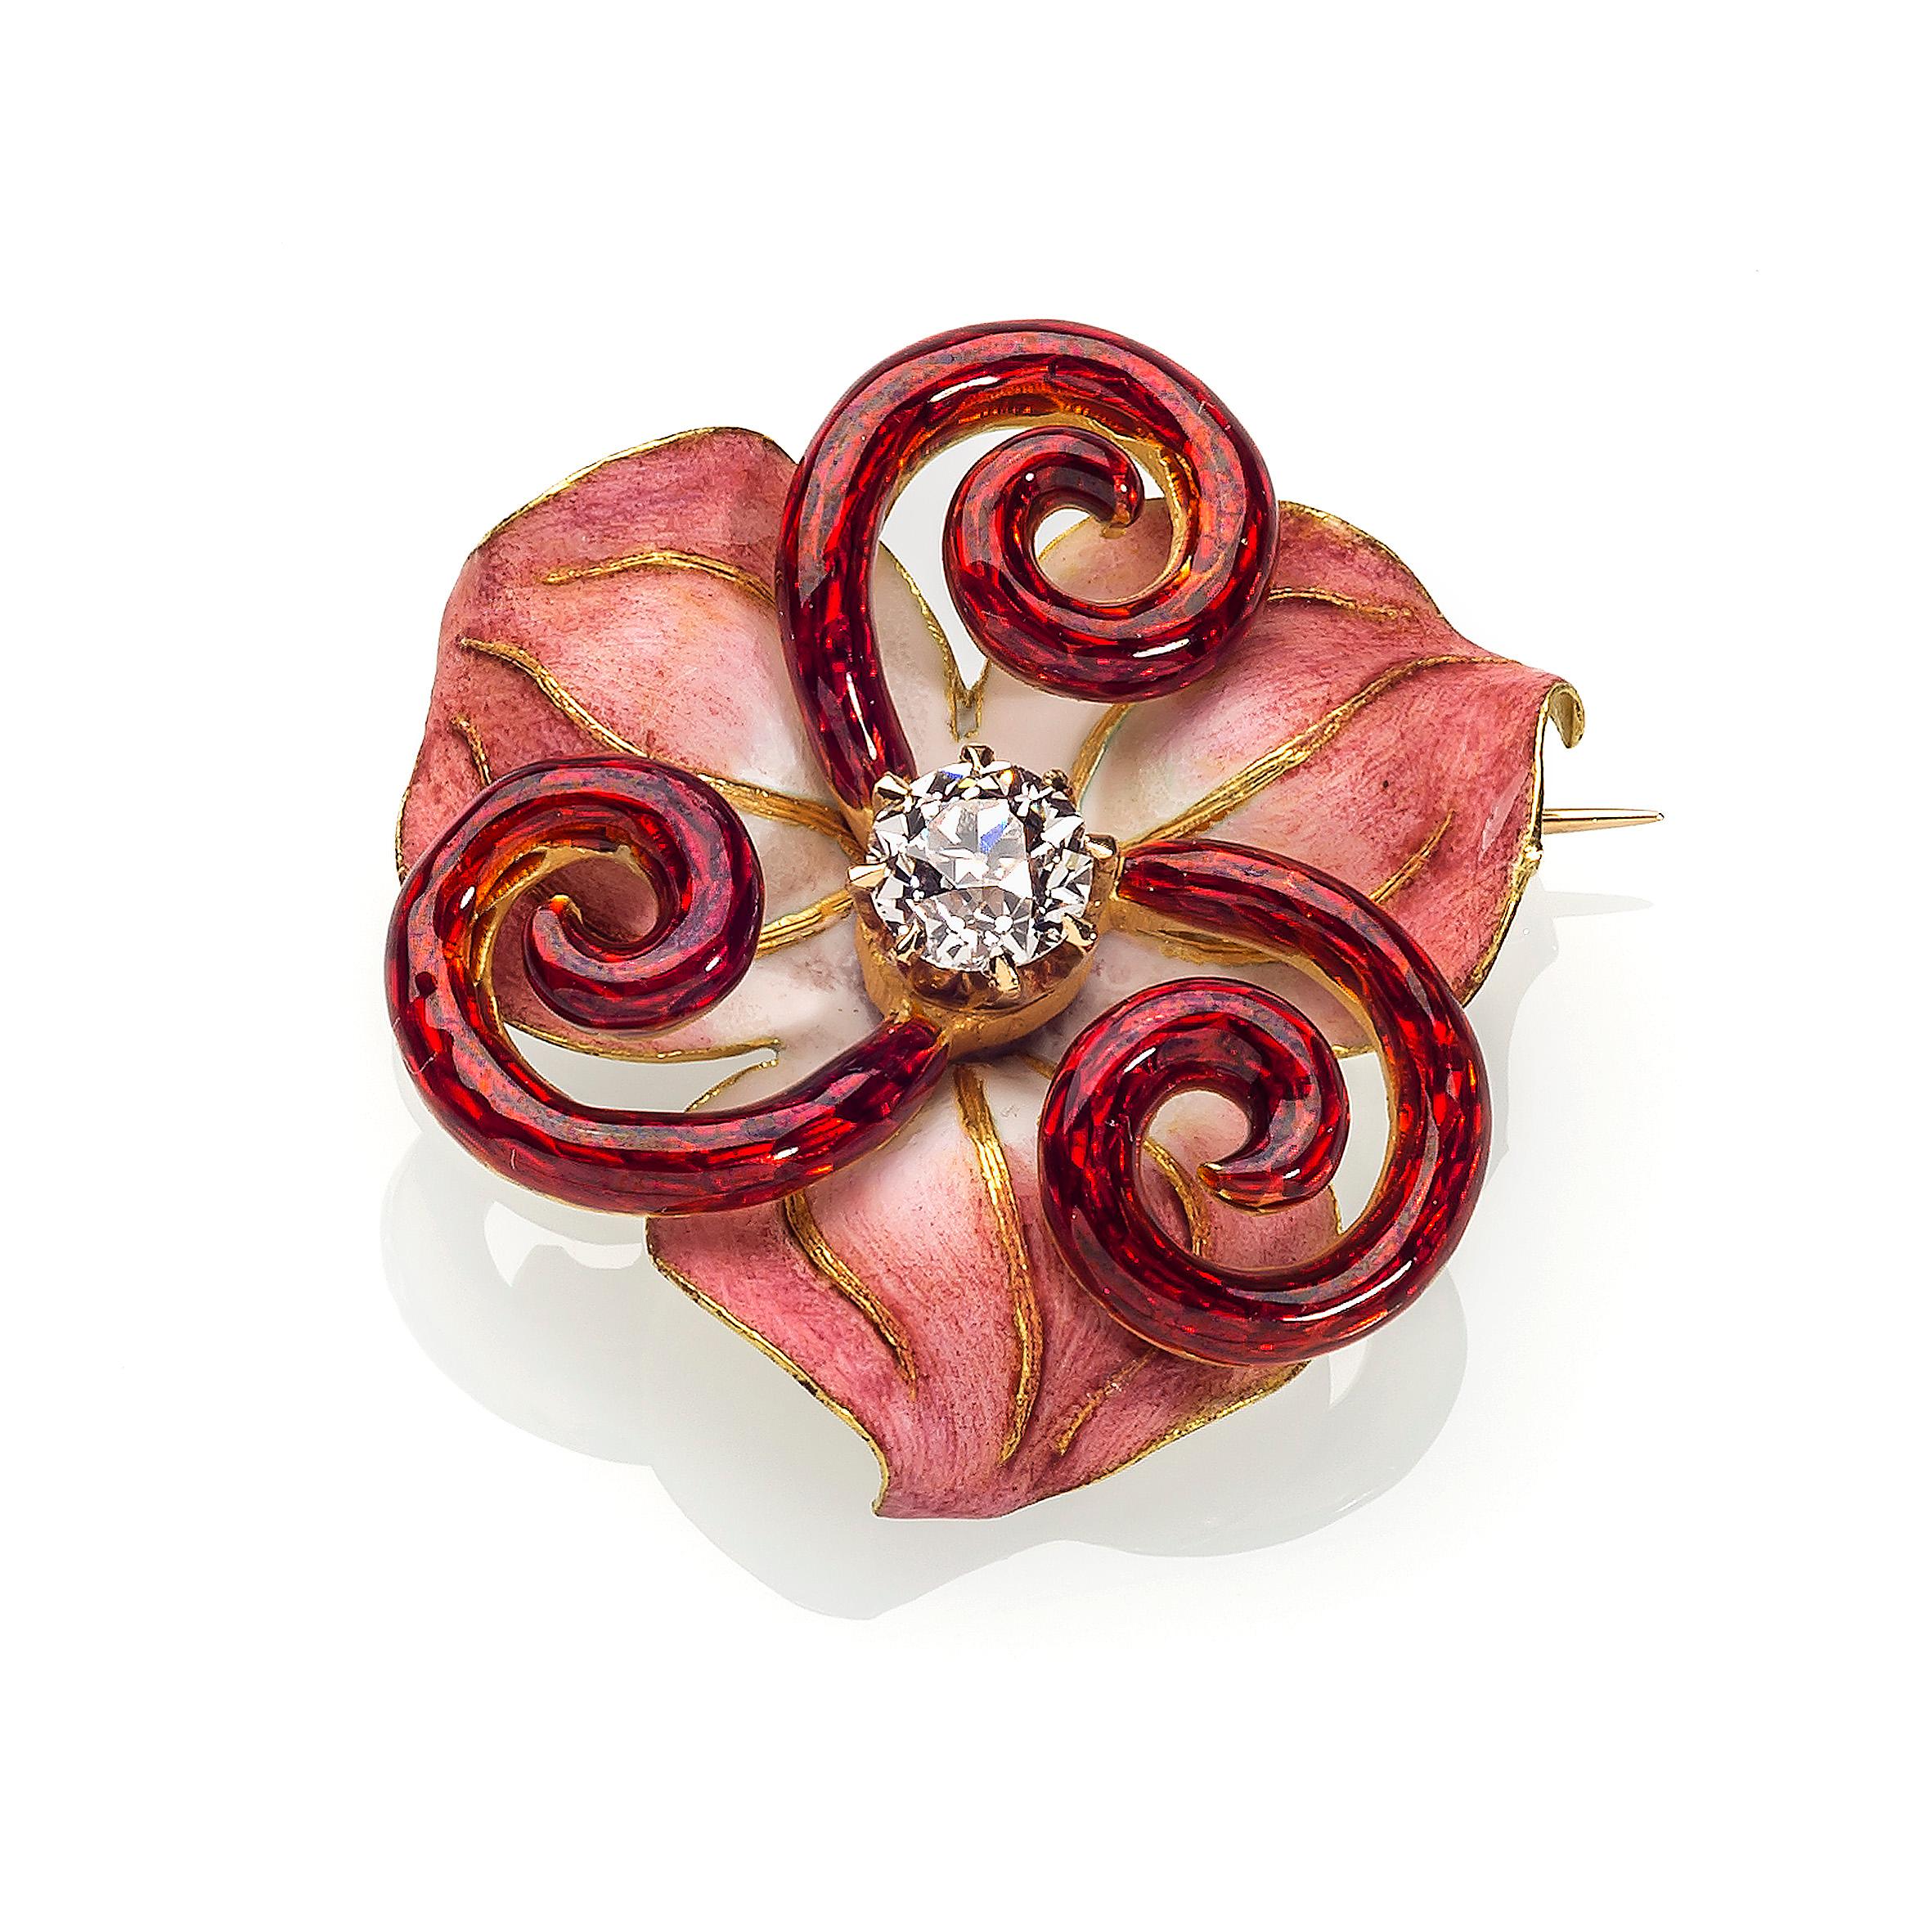 This beautiful jewel in the shape of a stylized lily is a fine example of the Art Nouveau art of enamelling.
The flower stems are executed in translucent guilloché enamel. The flower petals are painted with opaque enamel in subtle shades of pink,